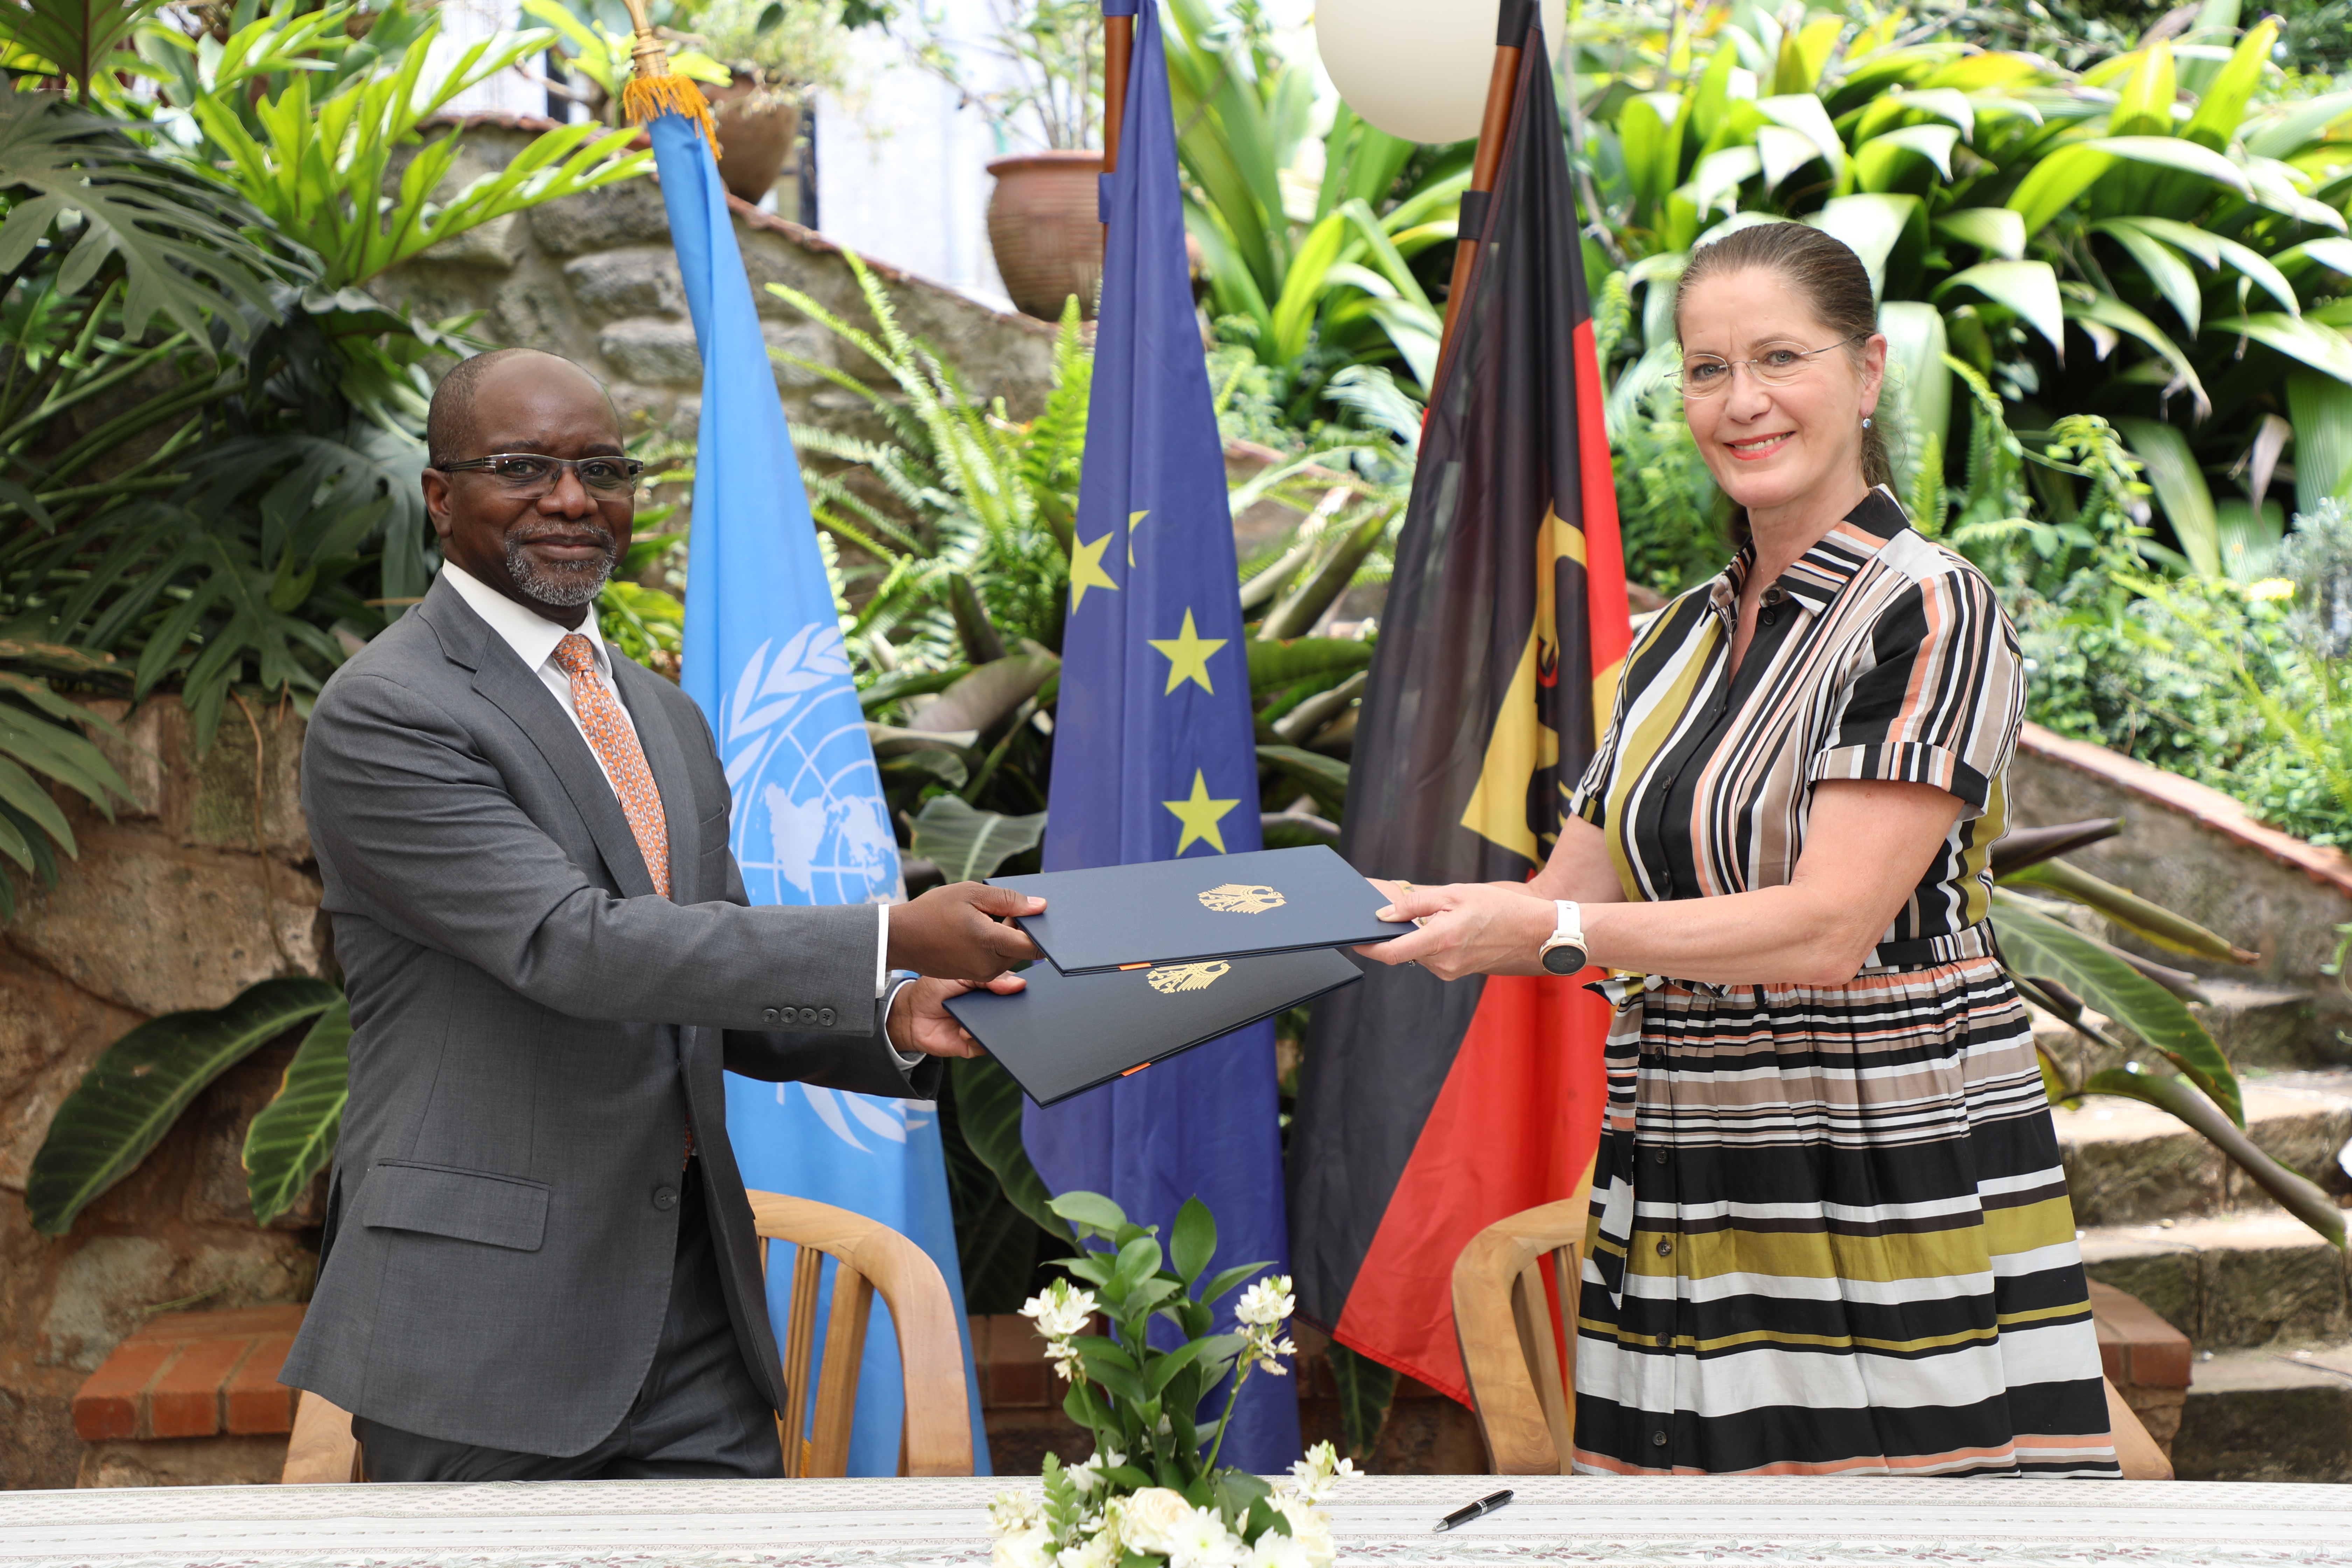 UN-Habitat Deputy Executive Director Mr. Victor Kisob with the German Ambassador to Kenya H.E. Annett Günther, During the signing of MoU to establish the United Nations Innovation Technology Accelerator for Cities in Nairobi, Kenya 2020